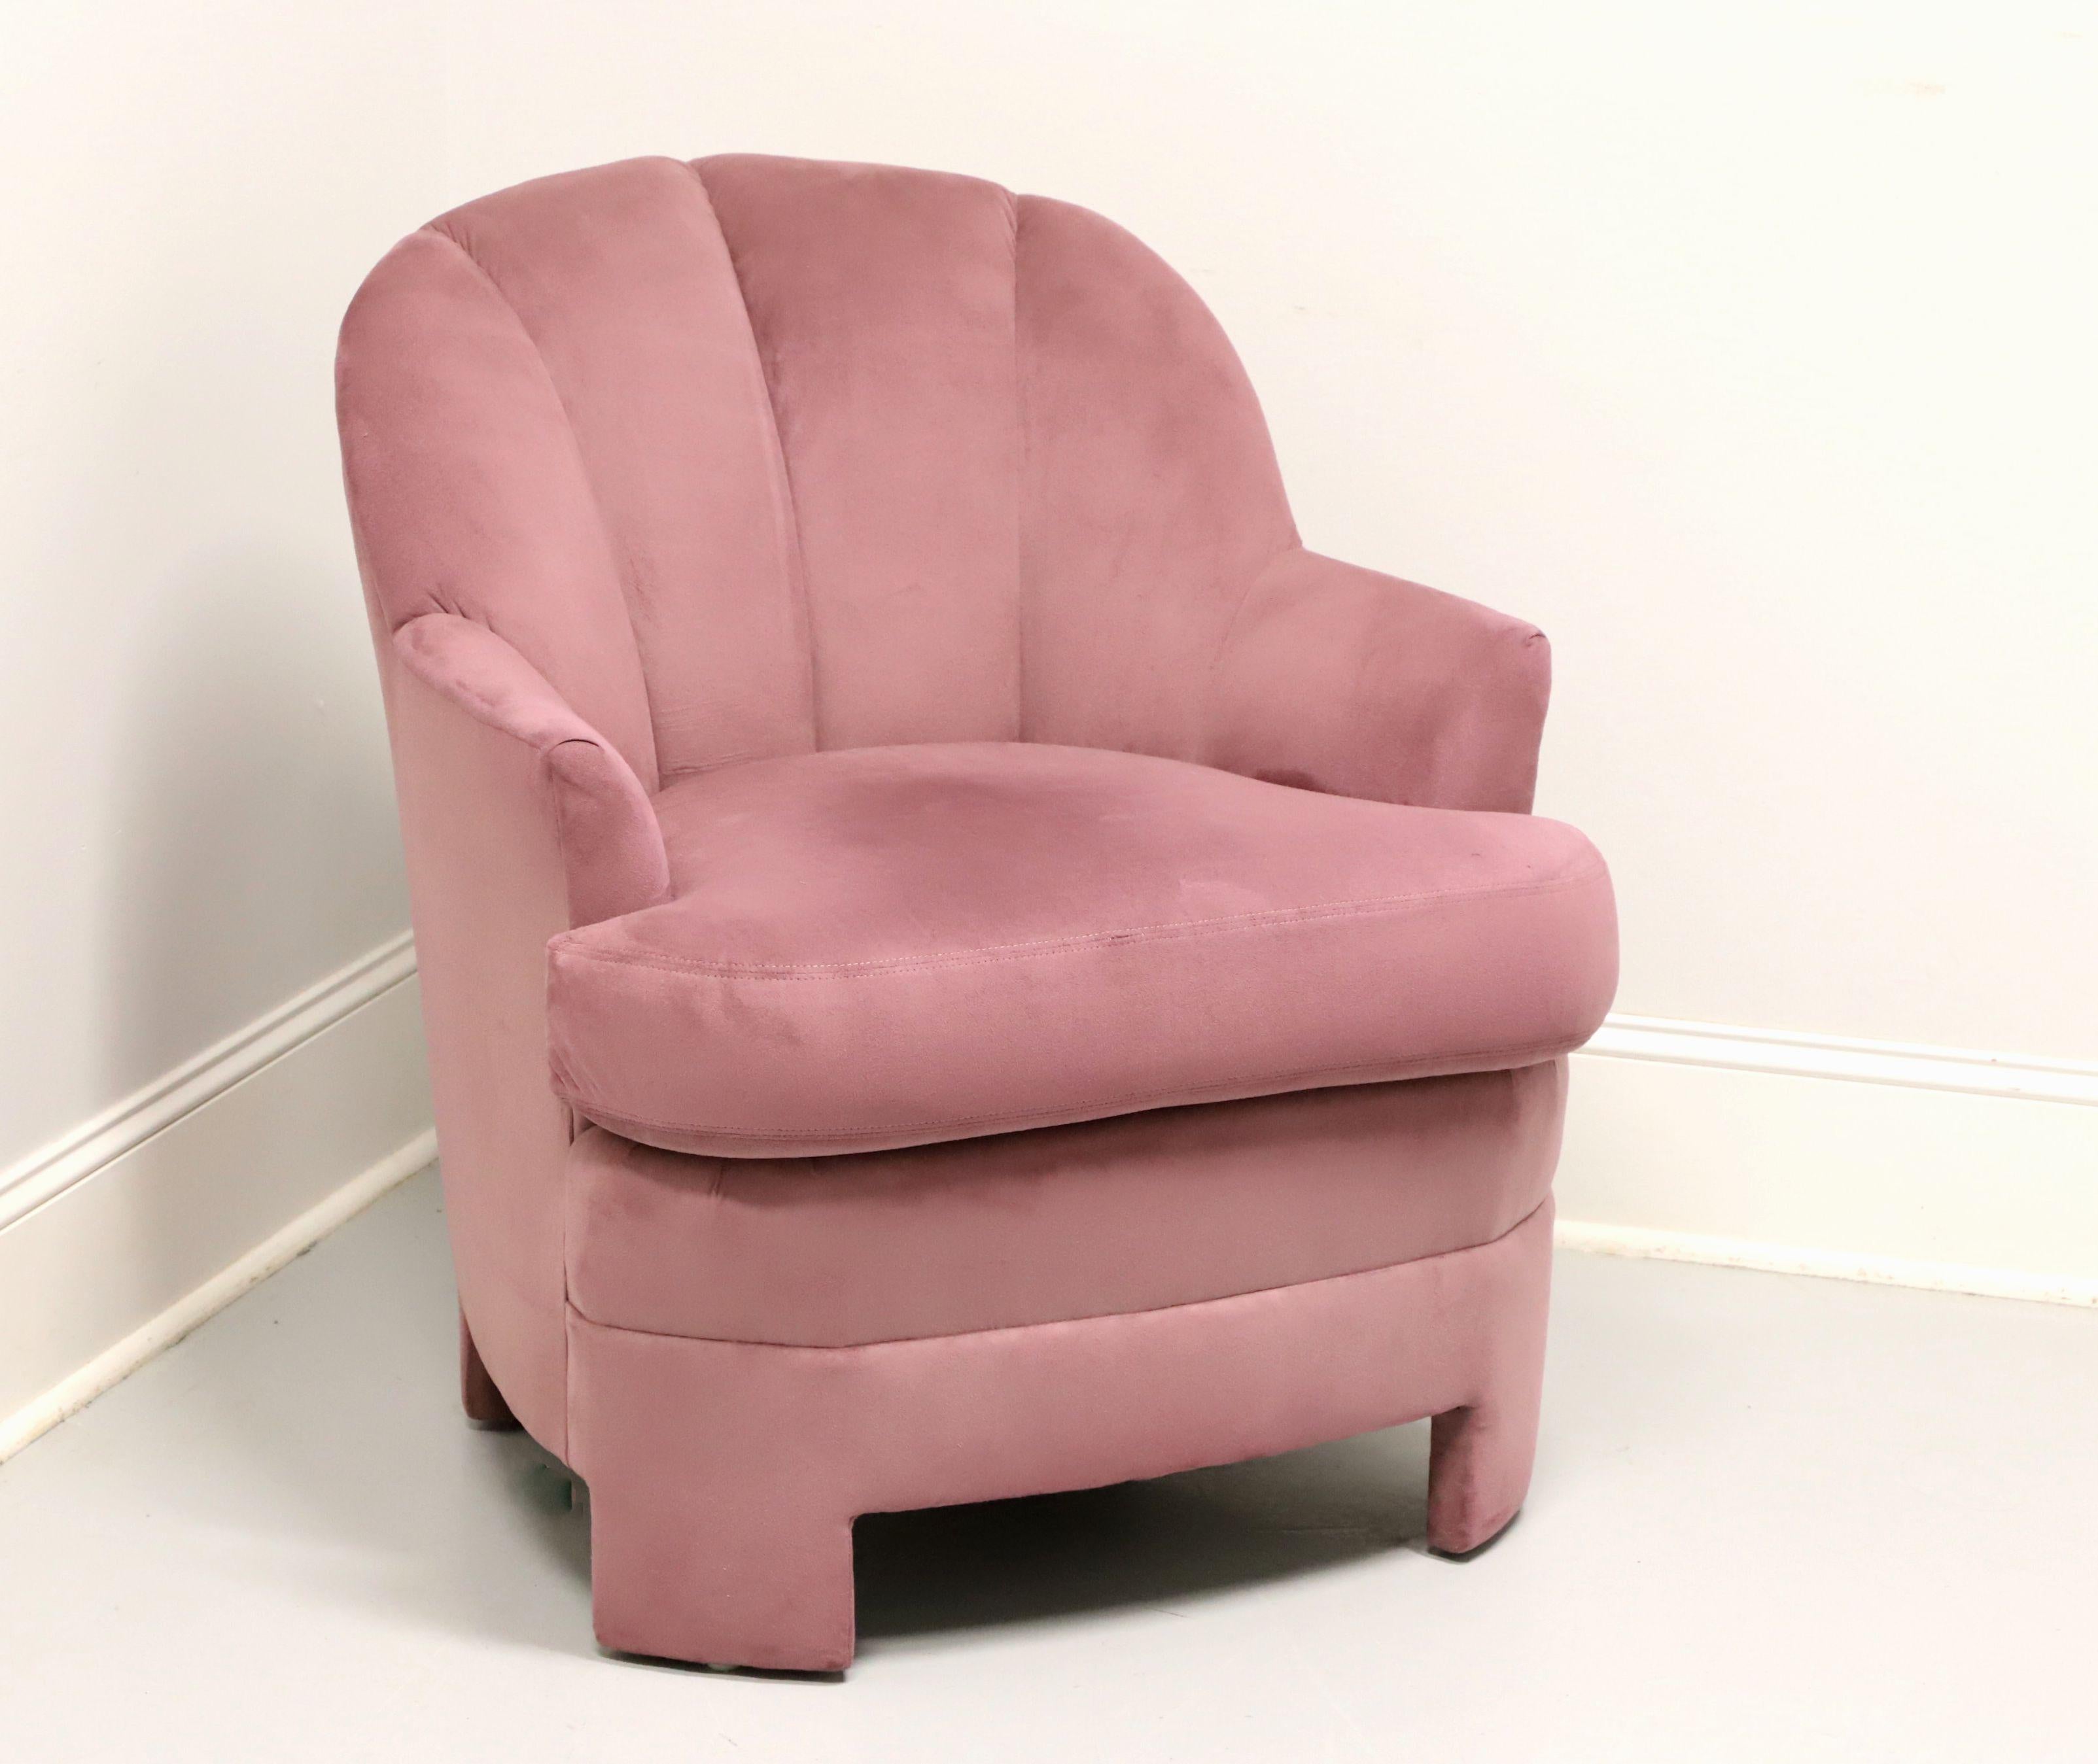 CLASSIC GALLERY Late 20th Century Art Deco Mauve Club Chair For Sale 4